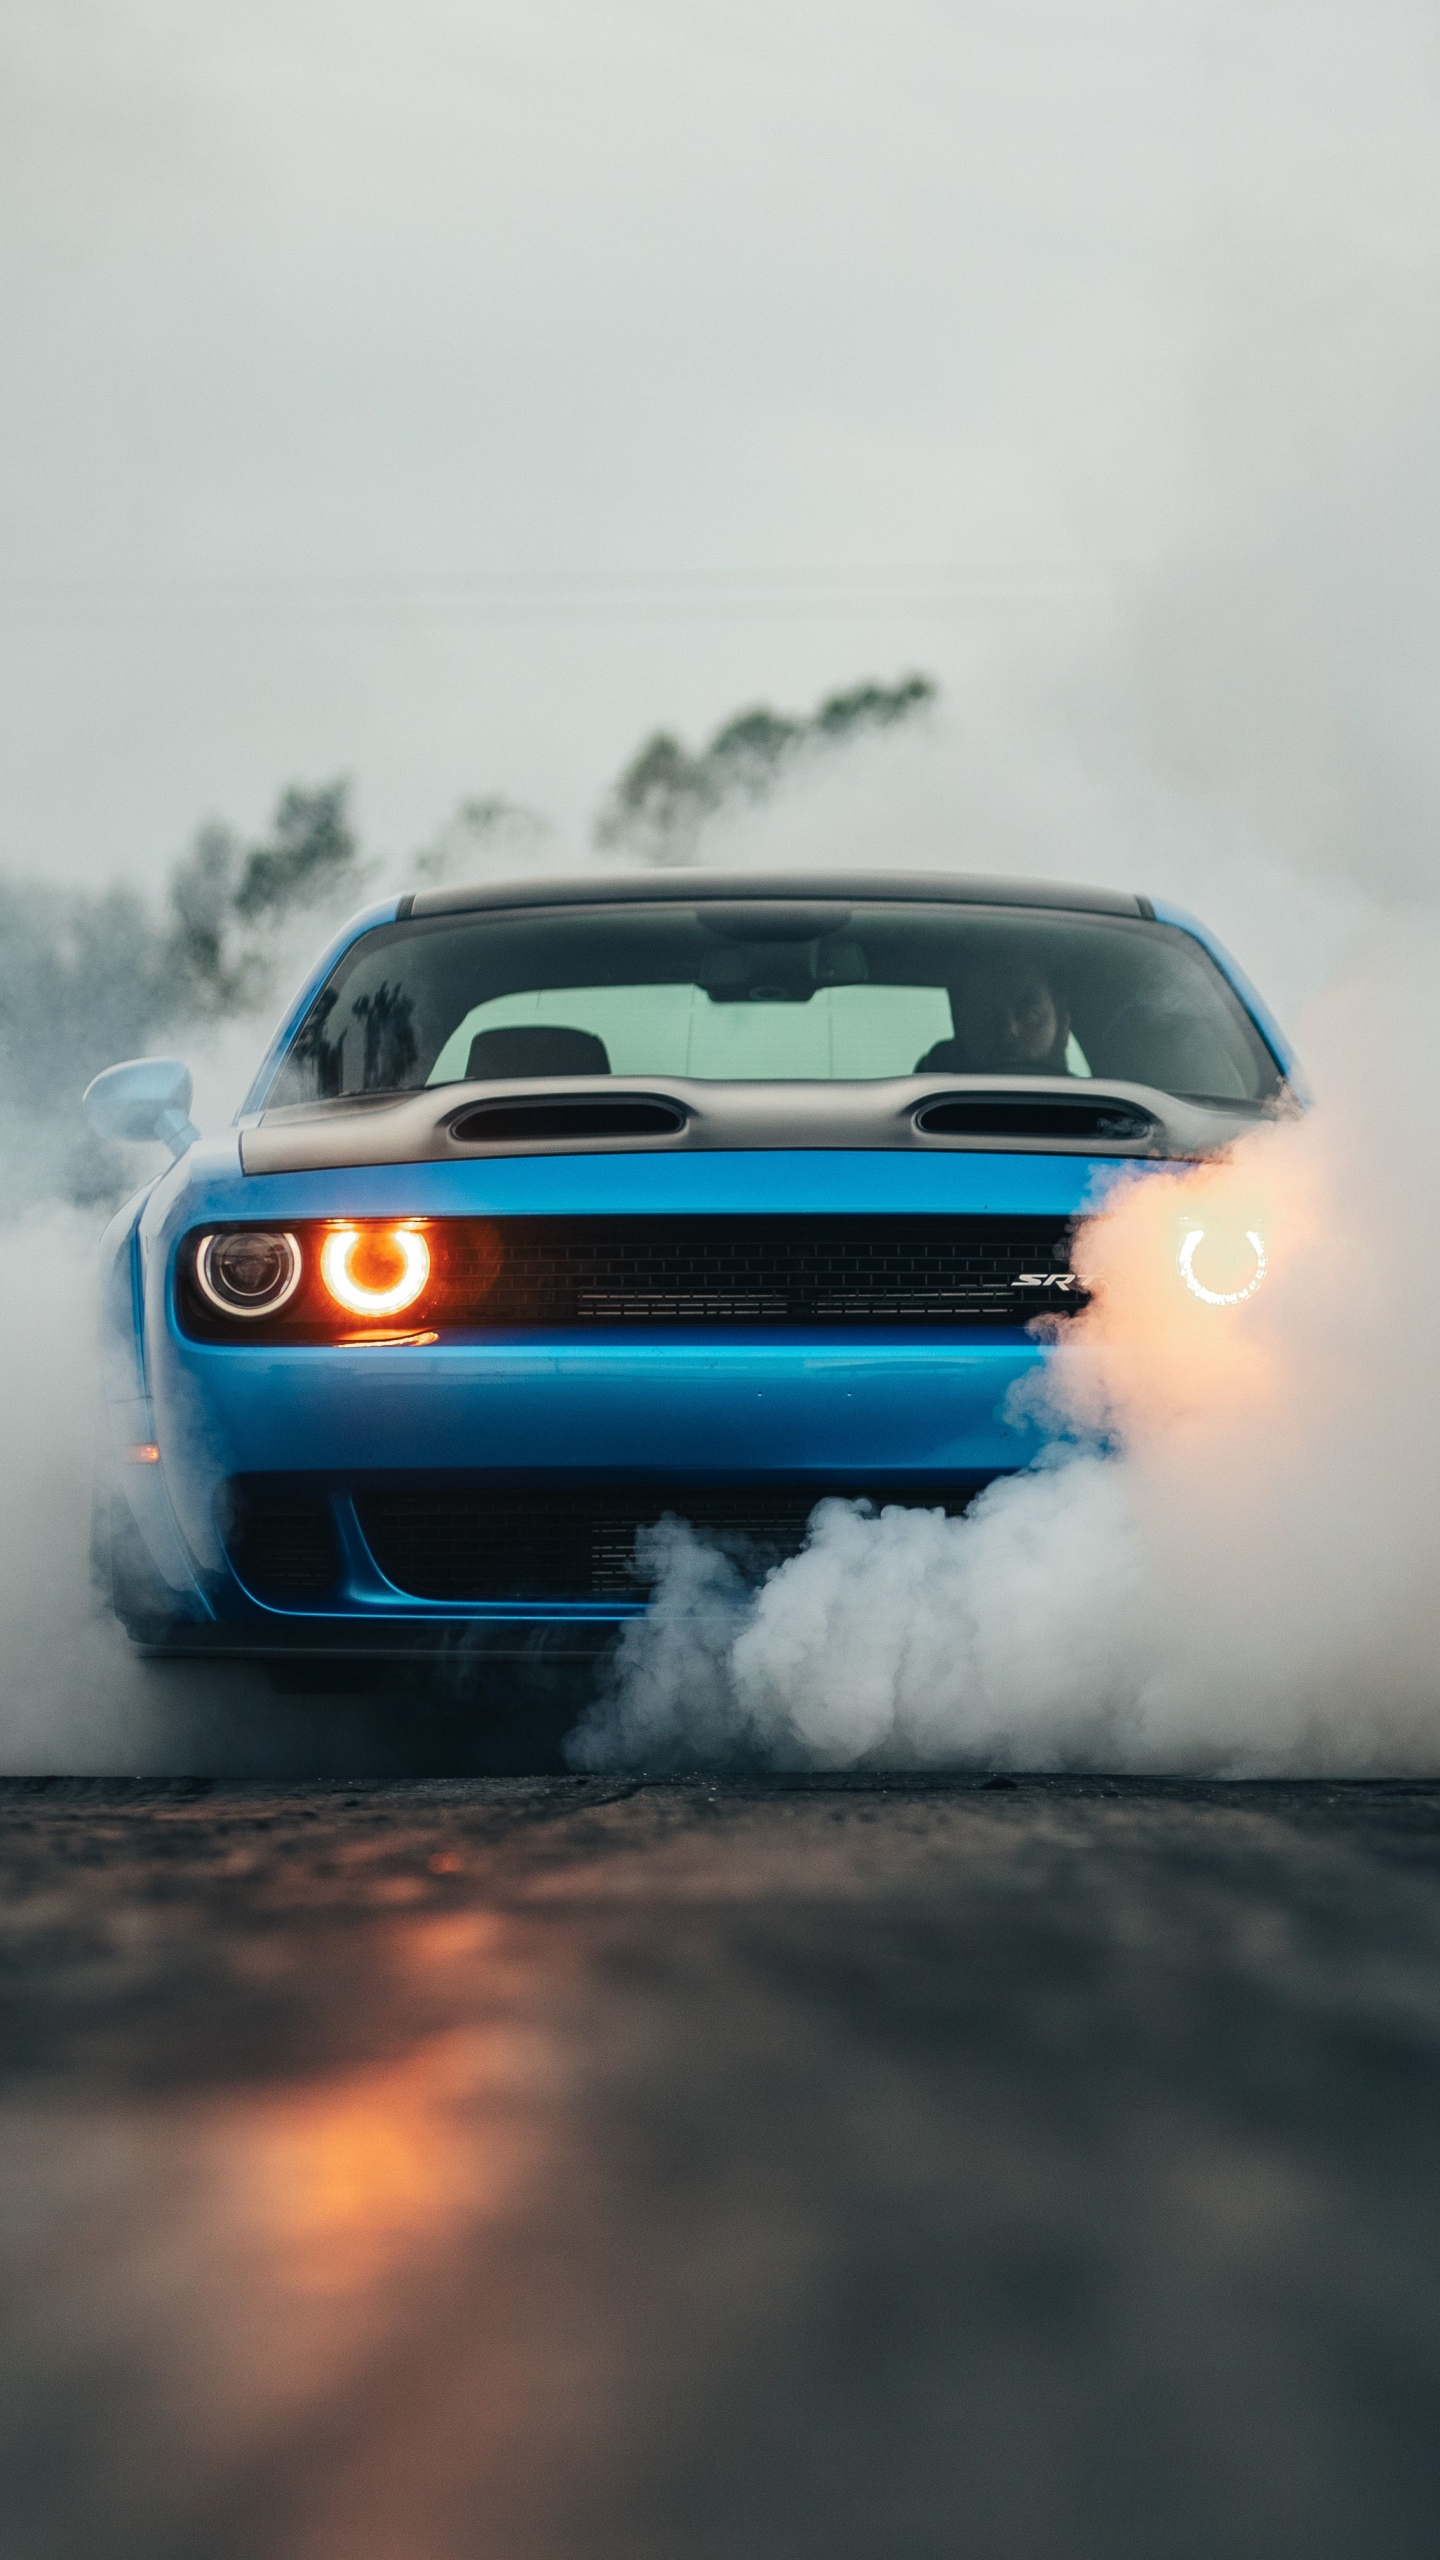 dodge challenger, muscle car, dodge challenger srt hellcat, dodge challenger srt, vehicles, dodge, car Free Stock Photo